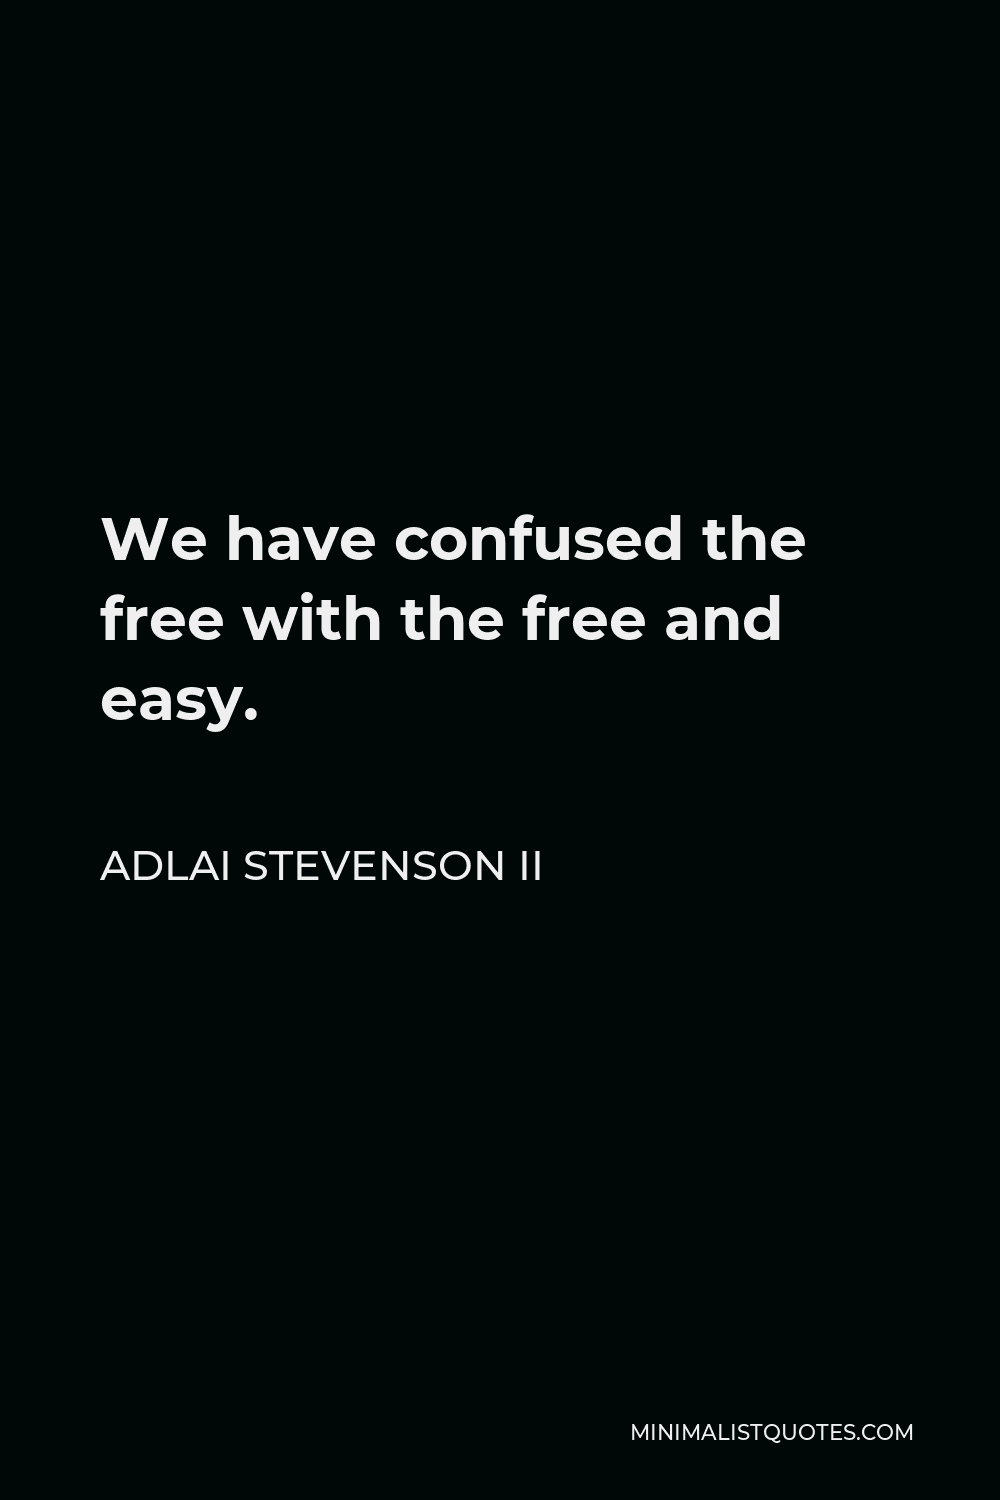 Adlai Stevenson II Quote - We have confused the free with the free and easy.